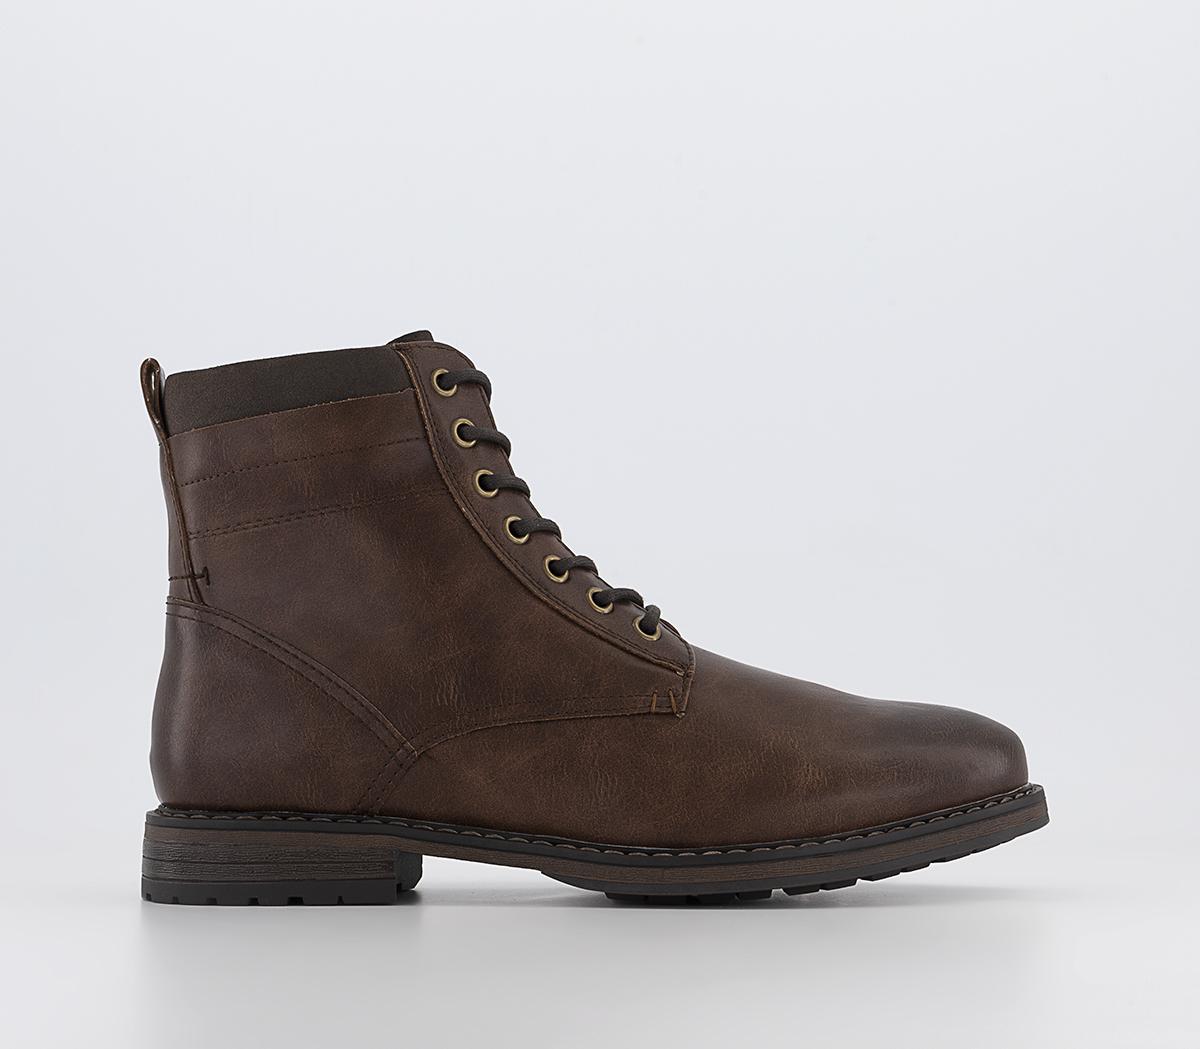 OFFICEBelvedere Round Toe Zip Lace Up BootsBrown